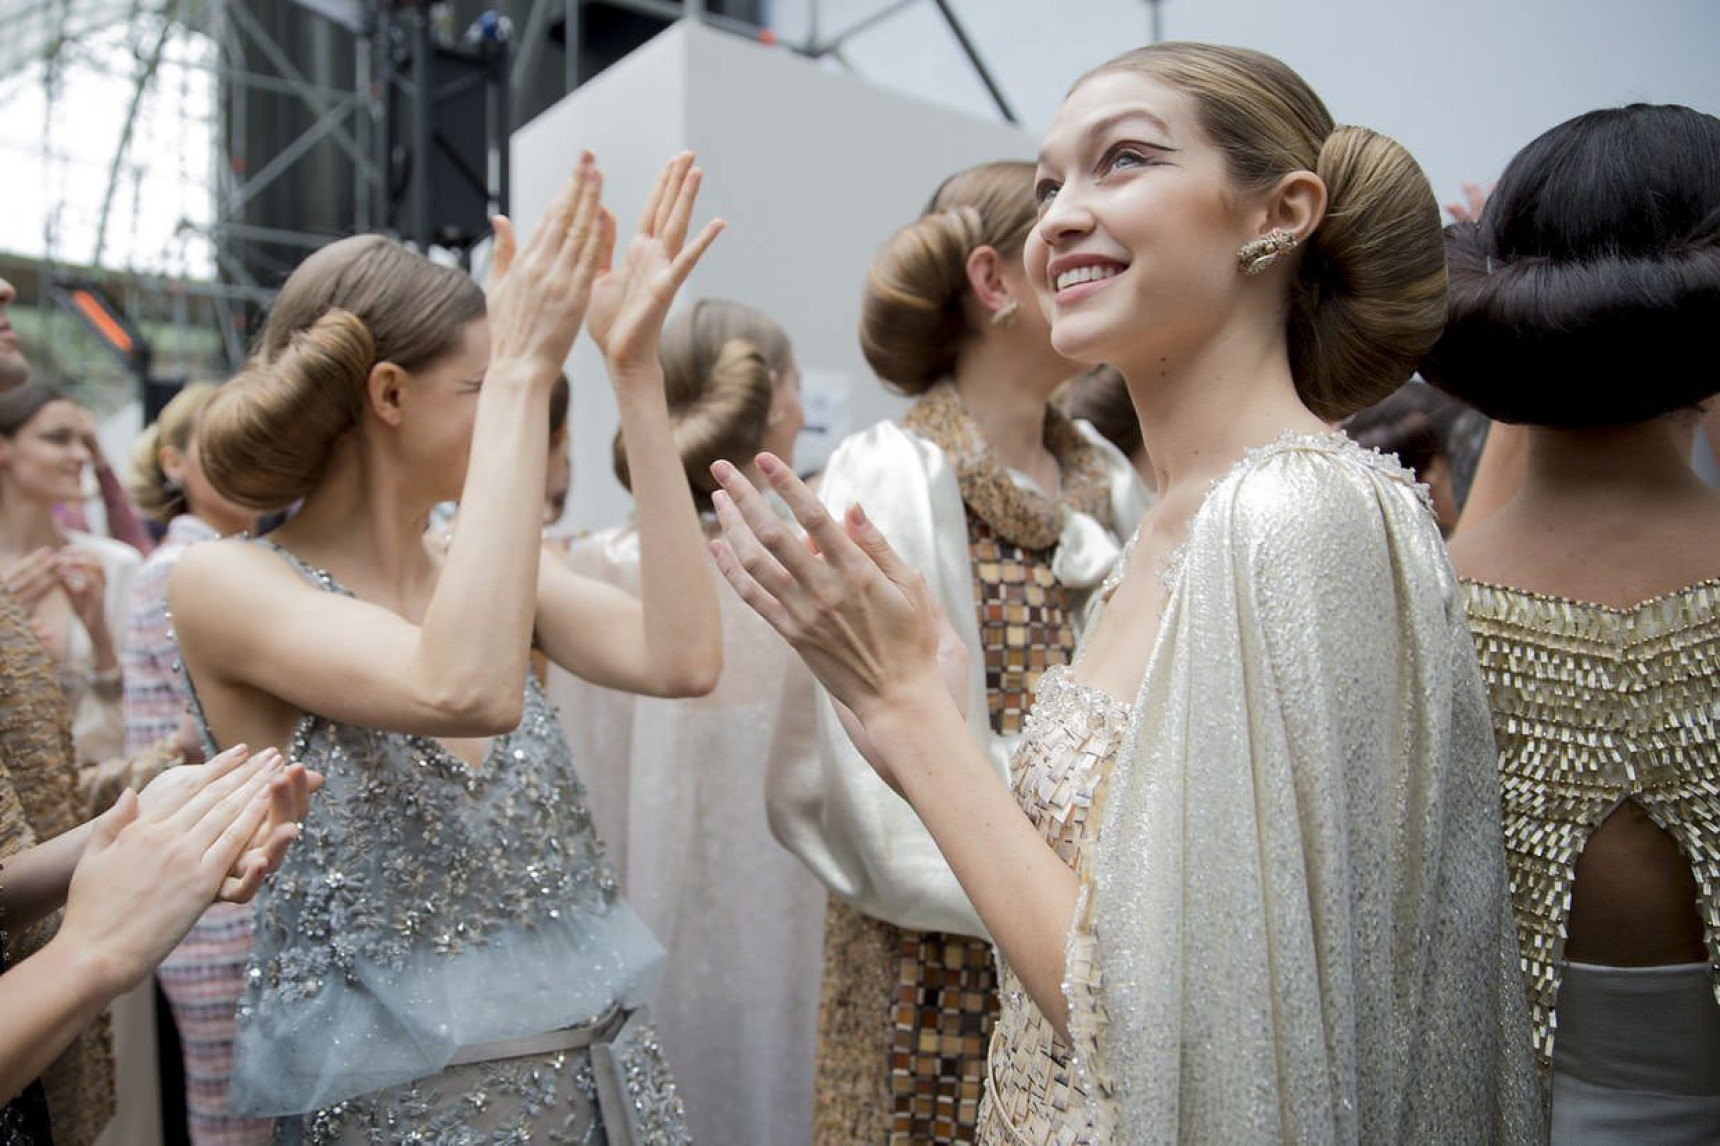 Models at Haute Couture fashion show clapping and smiling